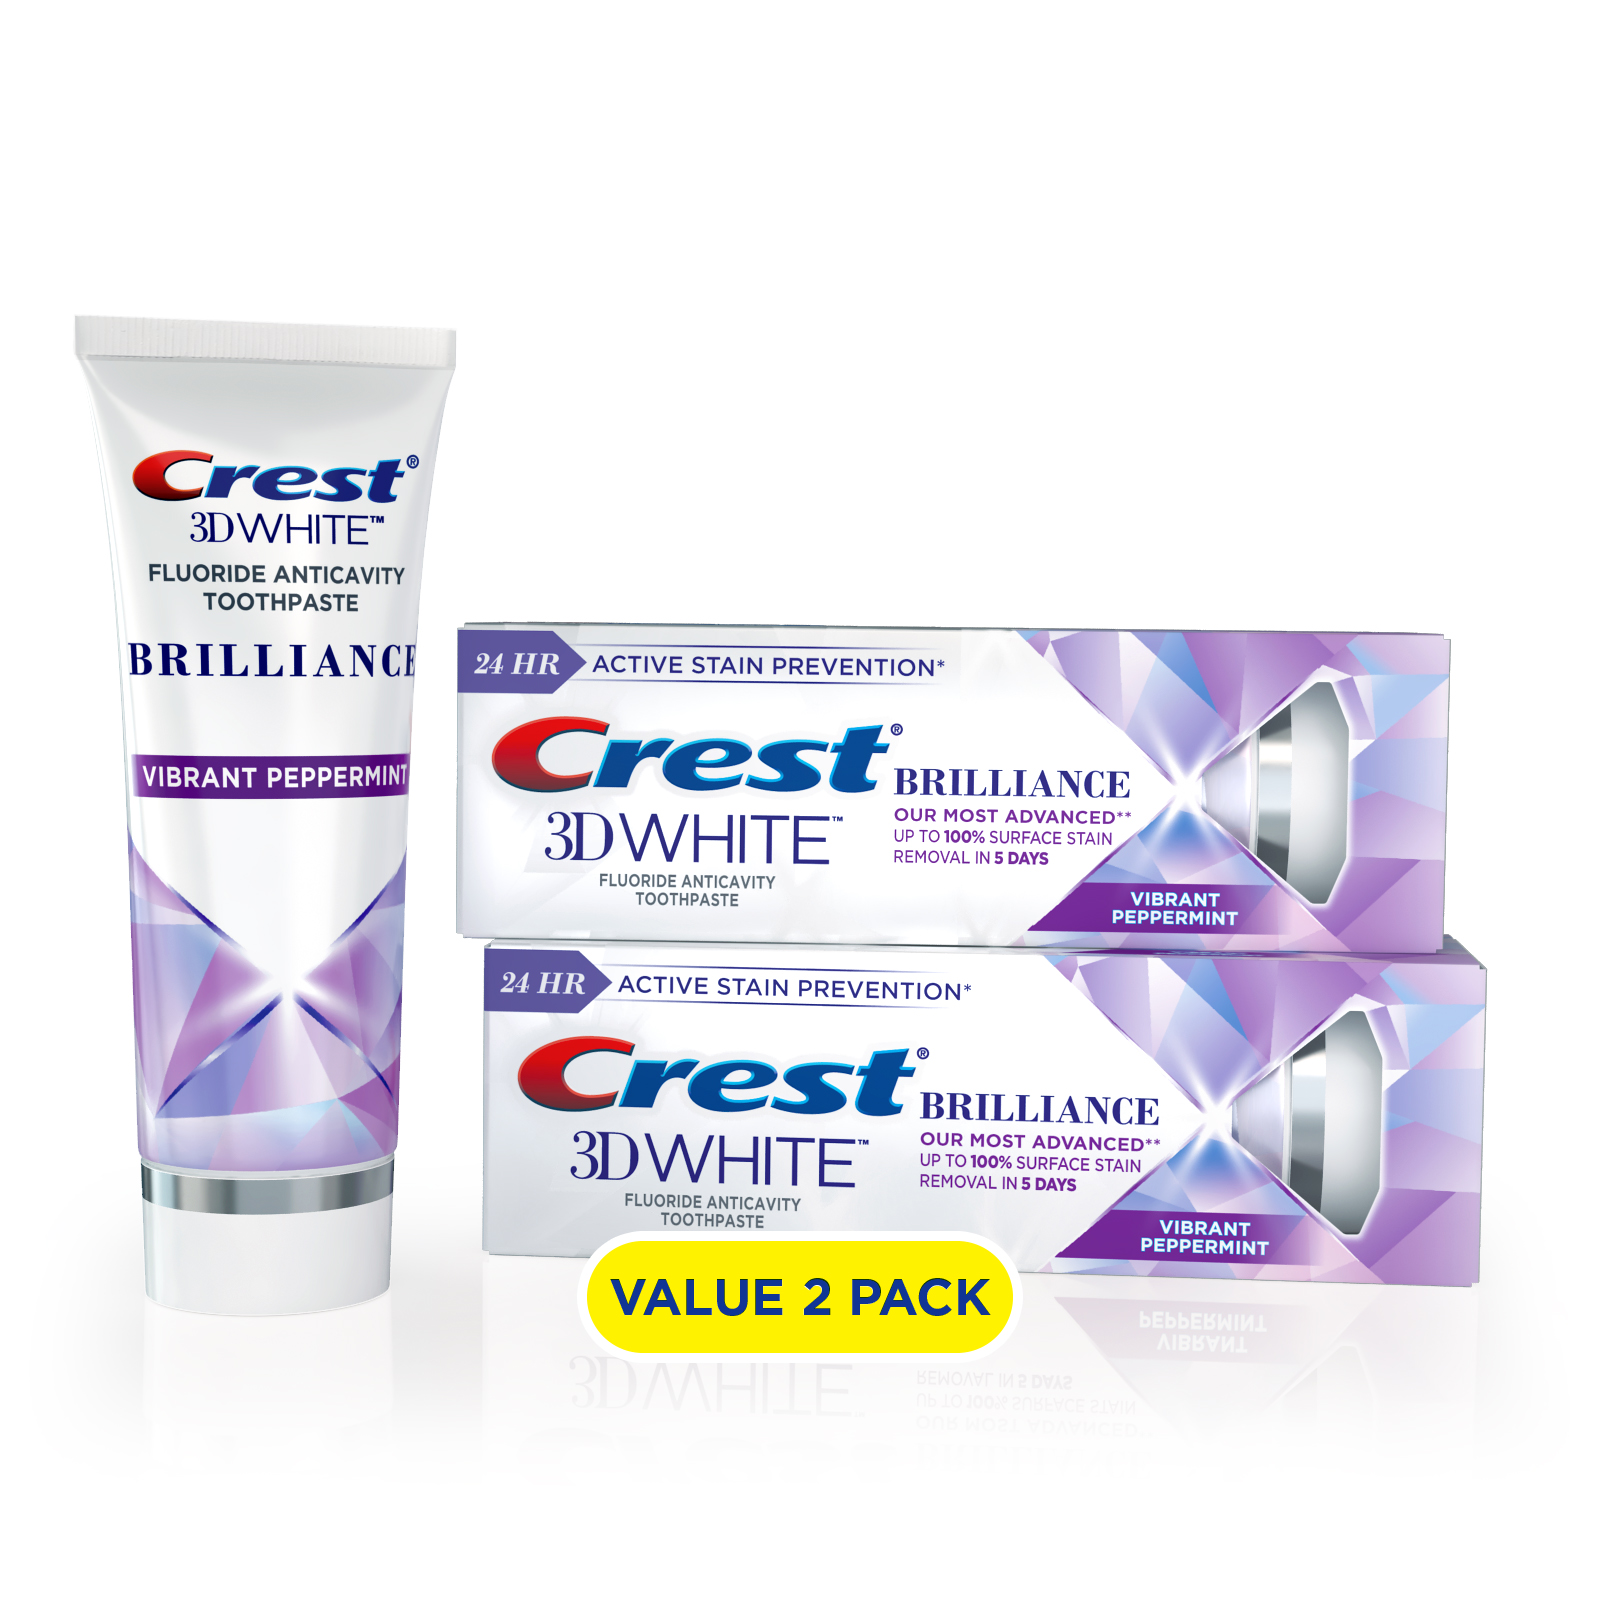 Crest 3D White Brilliance Toothpaste, Vibrant Peppermint, 3.9 oz, Pack of 2 - image 2 of 10